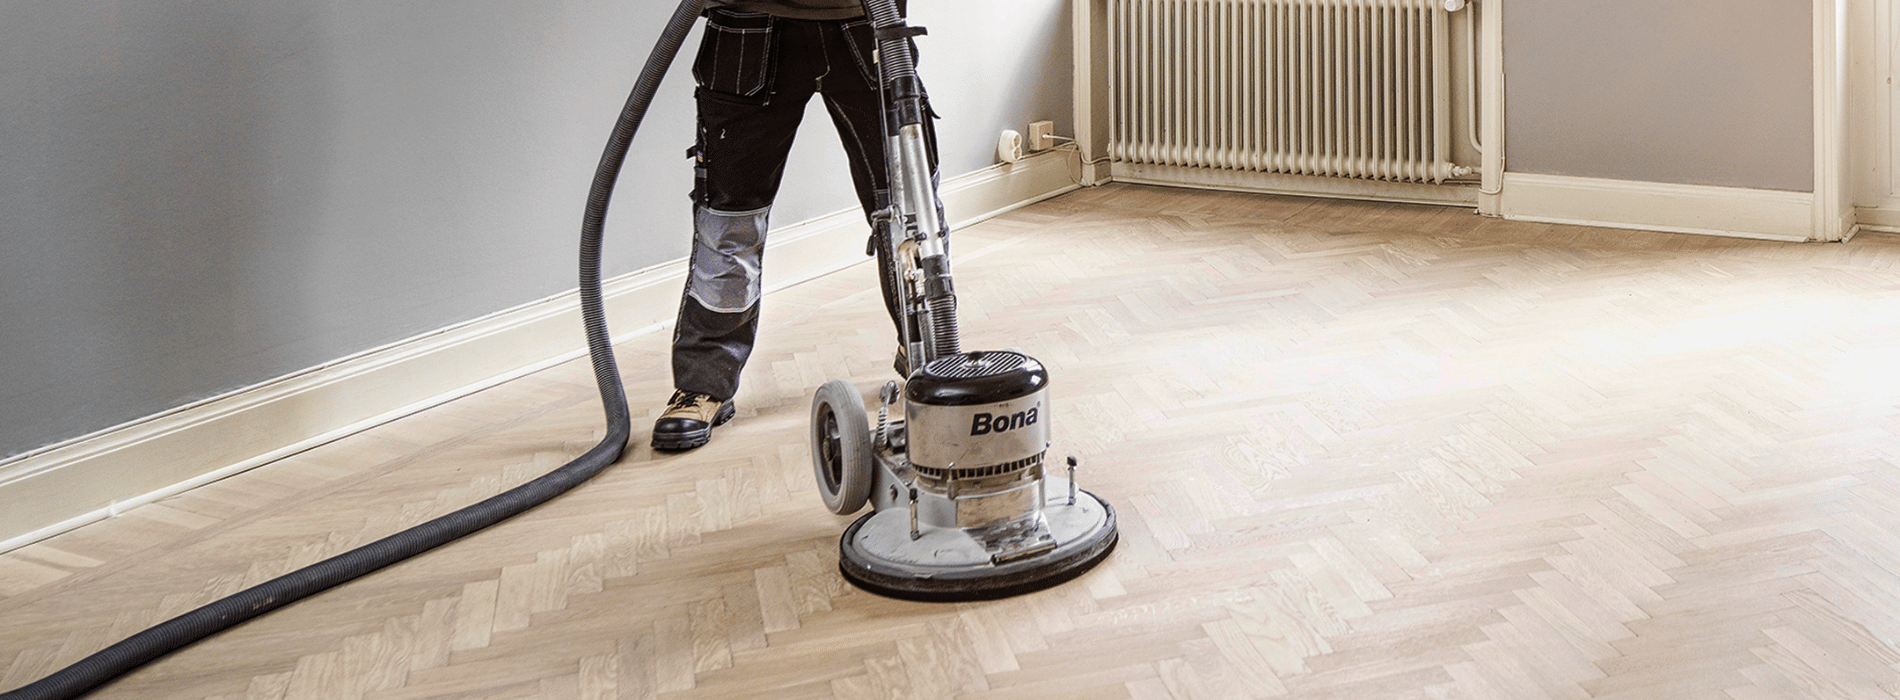 In Bermondsey, SE1, Mr Sander® are using a Bona FlexiSand 1.9 buffer sander with Ø 407 mm dimension, 1.9 kW effect, 230 V voltage, and 50 Hz/60 Hz frequency. They connect it to a dust extraction system with a HEPA filter for clean and efficient results while sanding a parquet floor.